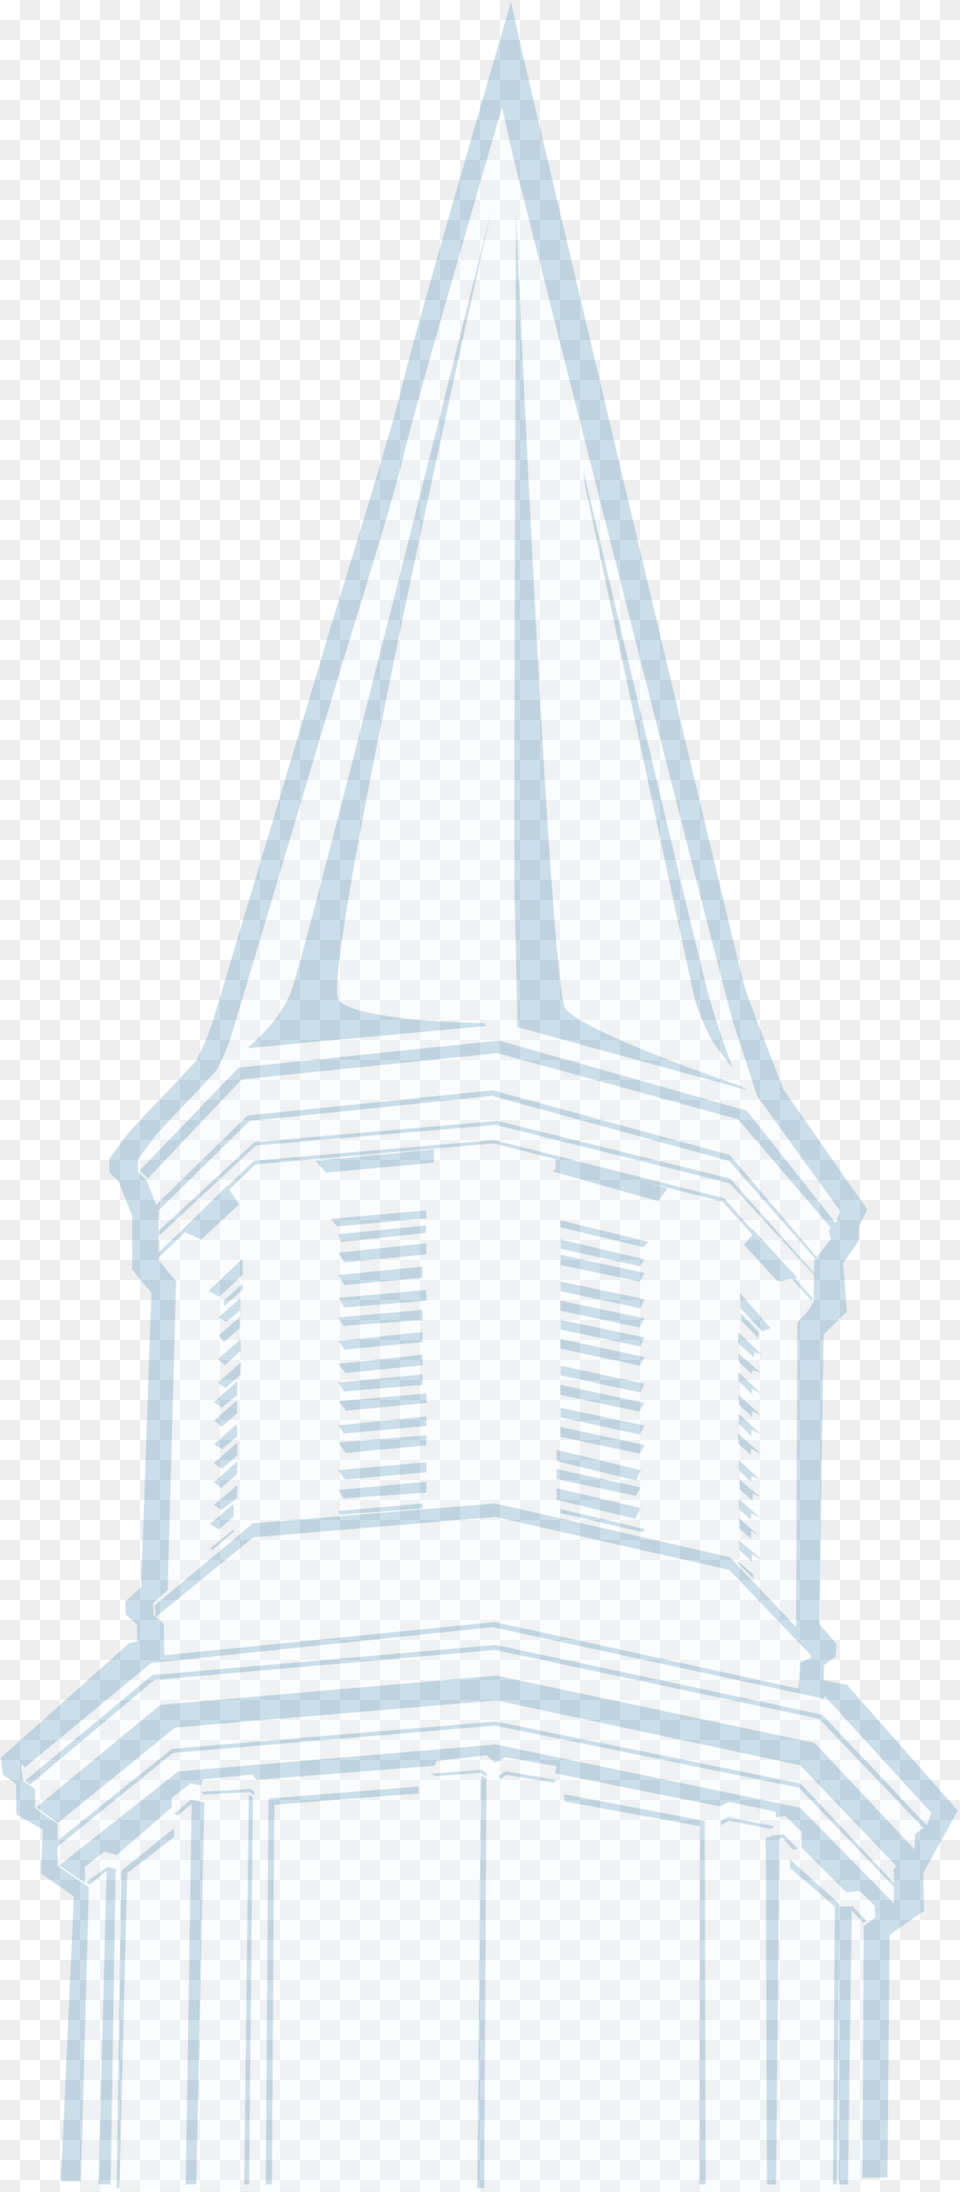 Roswellpress Full Steeple, Architecture, Bell Tower, Building, Spire Free Transparent Png